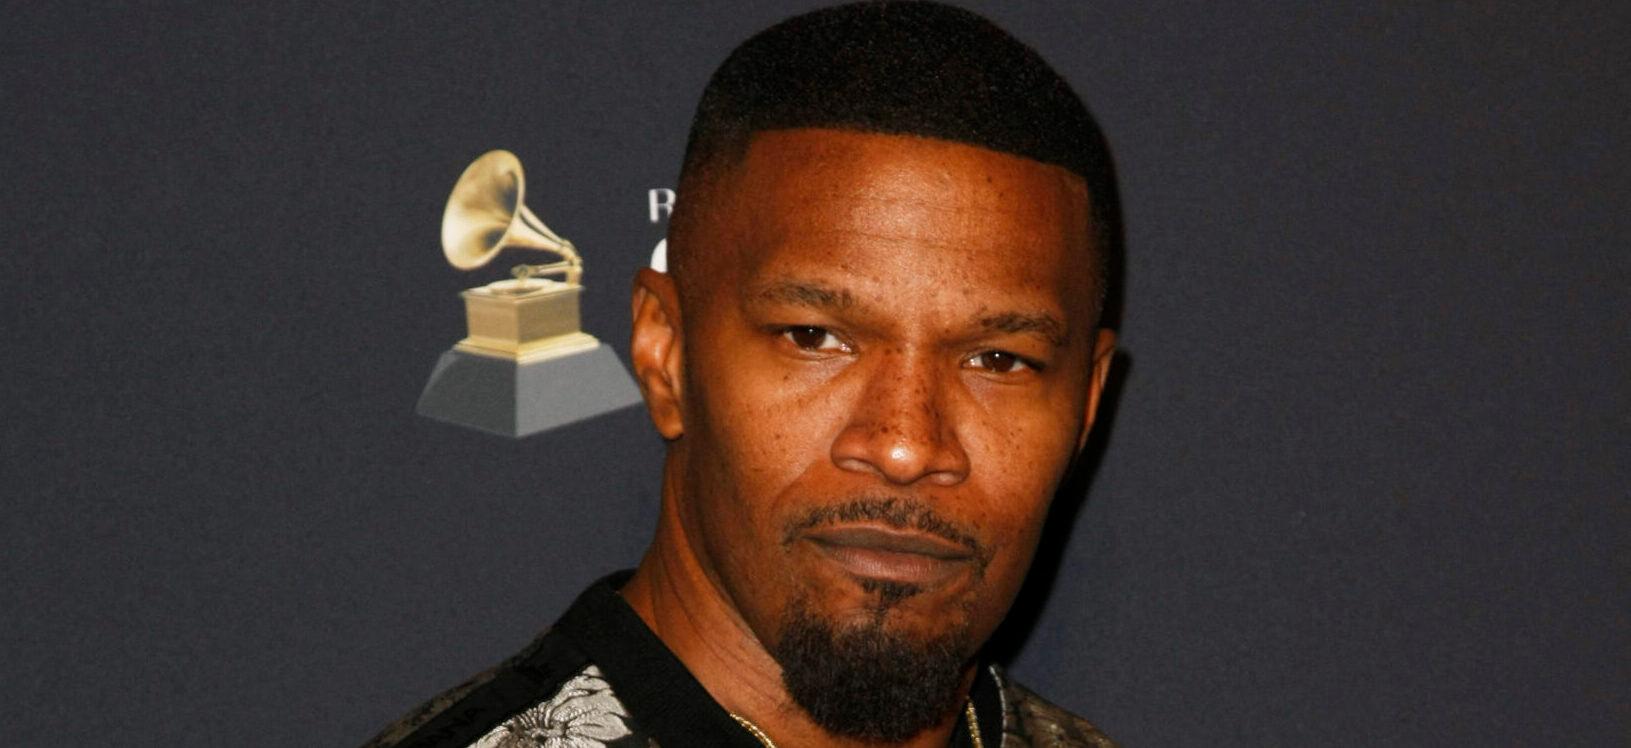 Jamie Foxx Posts Cryptic Message About ‘Jesus’ & ‘Fake Friends’: ‘They Killed This Dude’